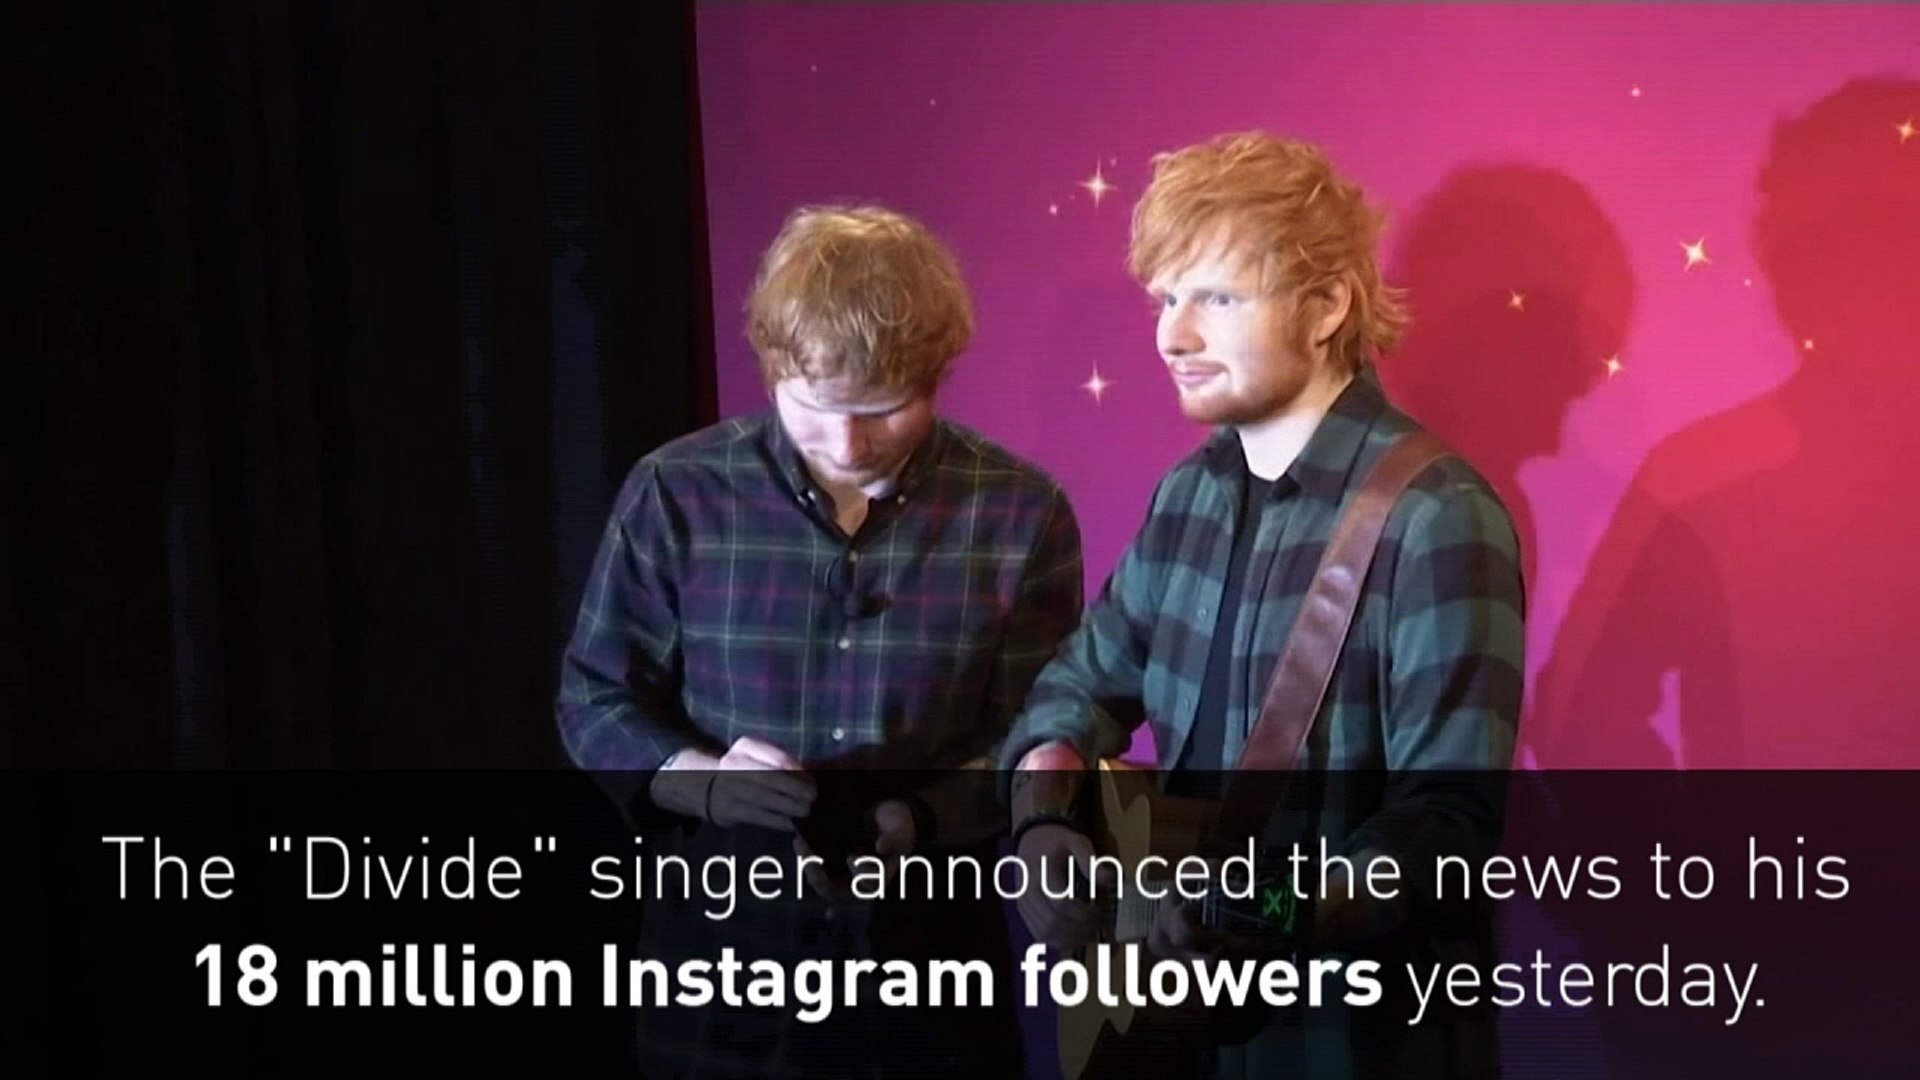 Congratulations to Ed Sheeran on his engagement